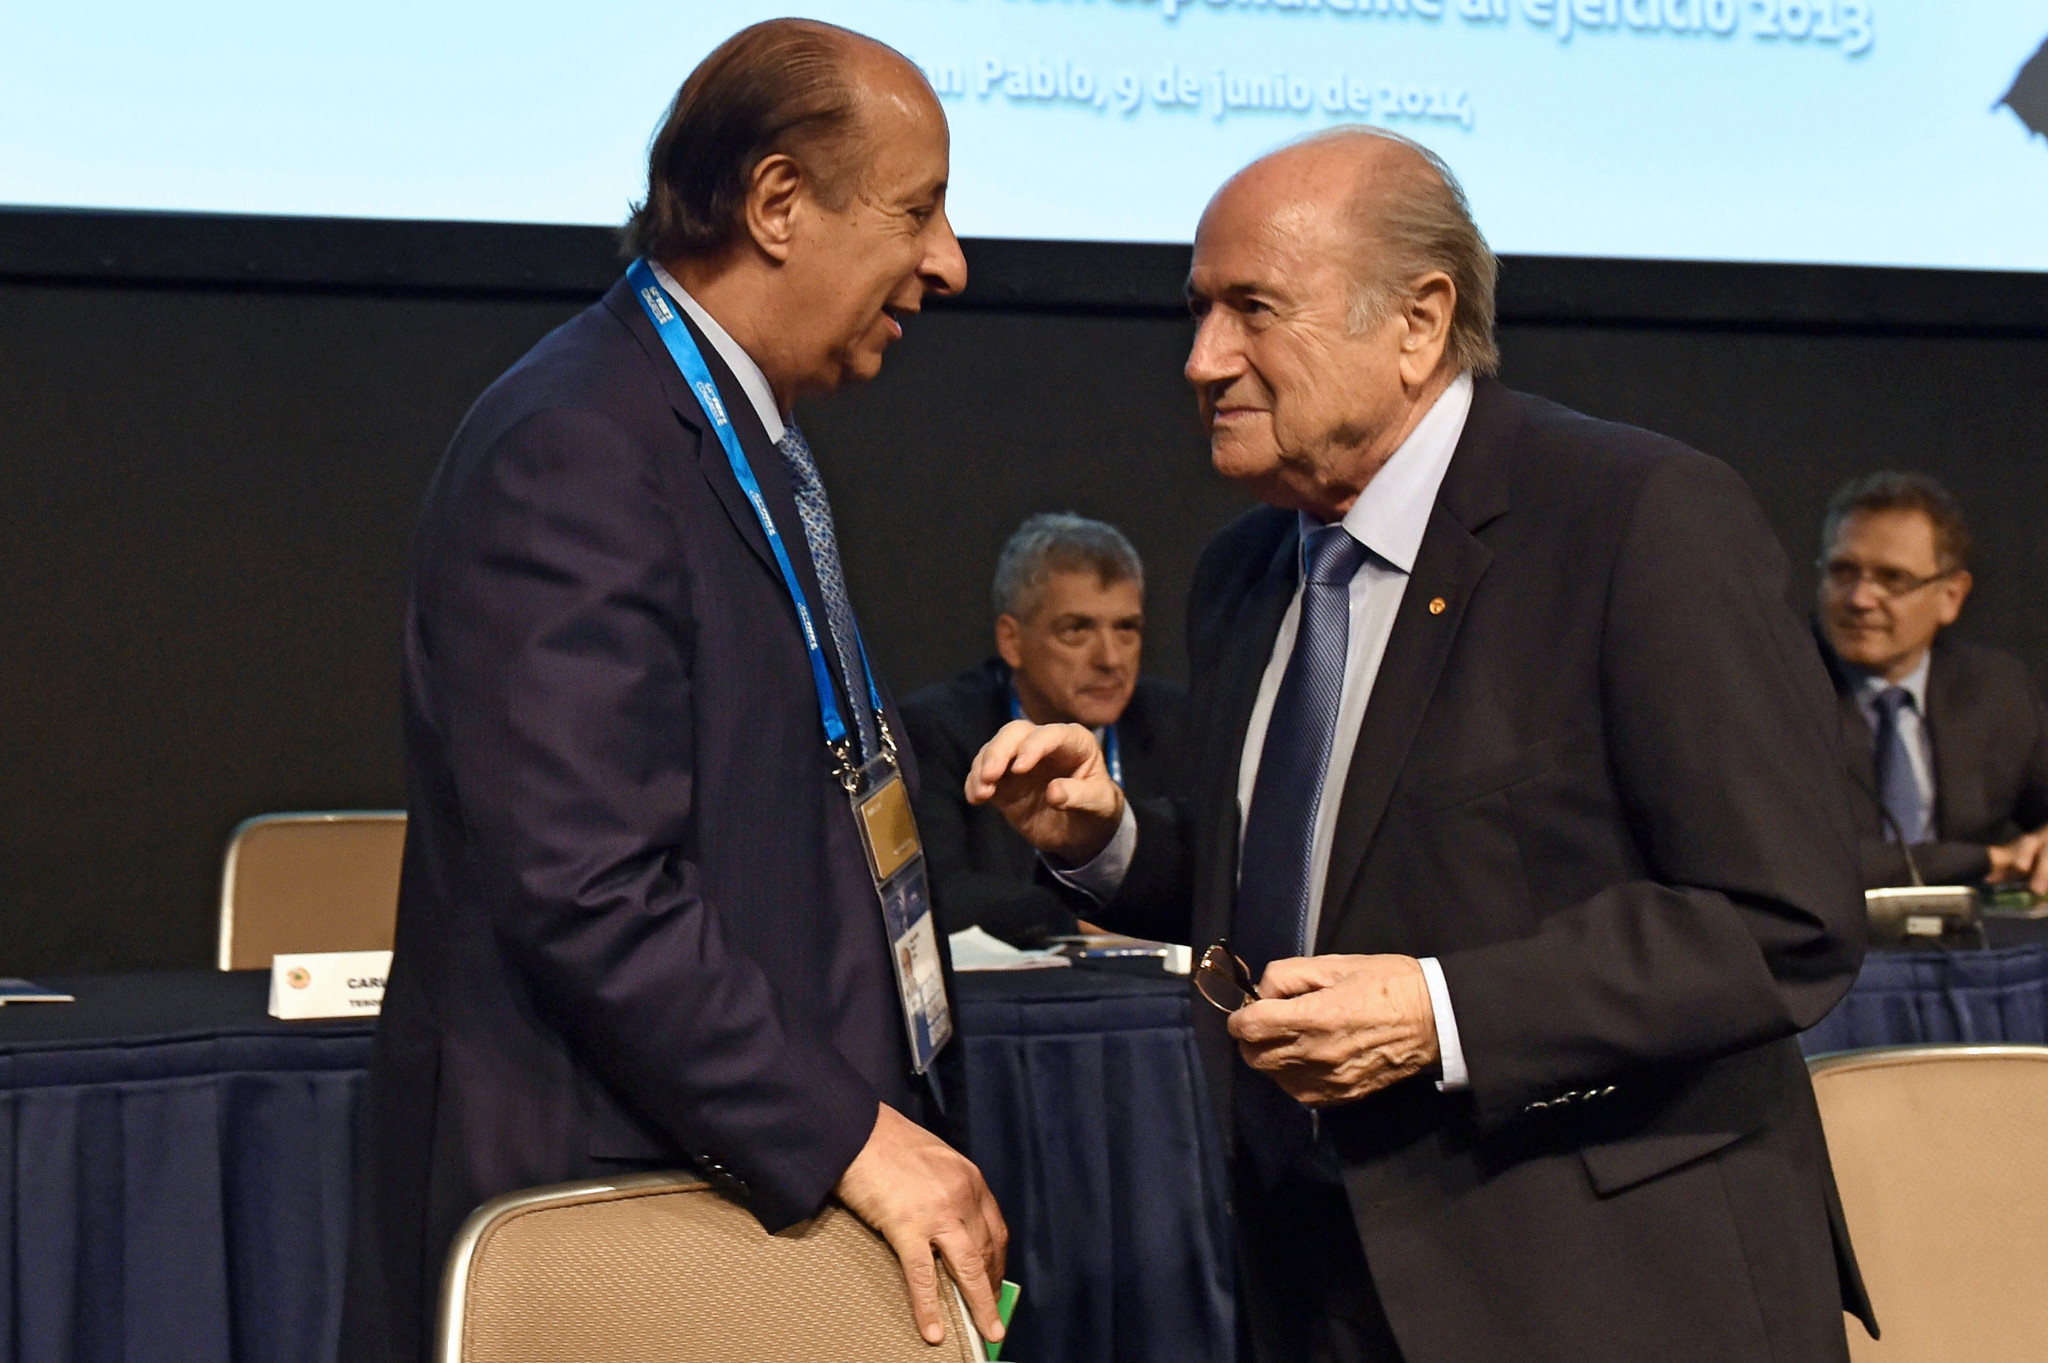 Marco Polo Del Nero, left, pictured with then-FIFA President Sepp Blatter in 2014 ©Getty Images